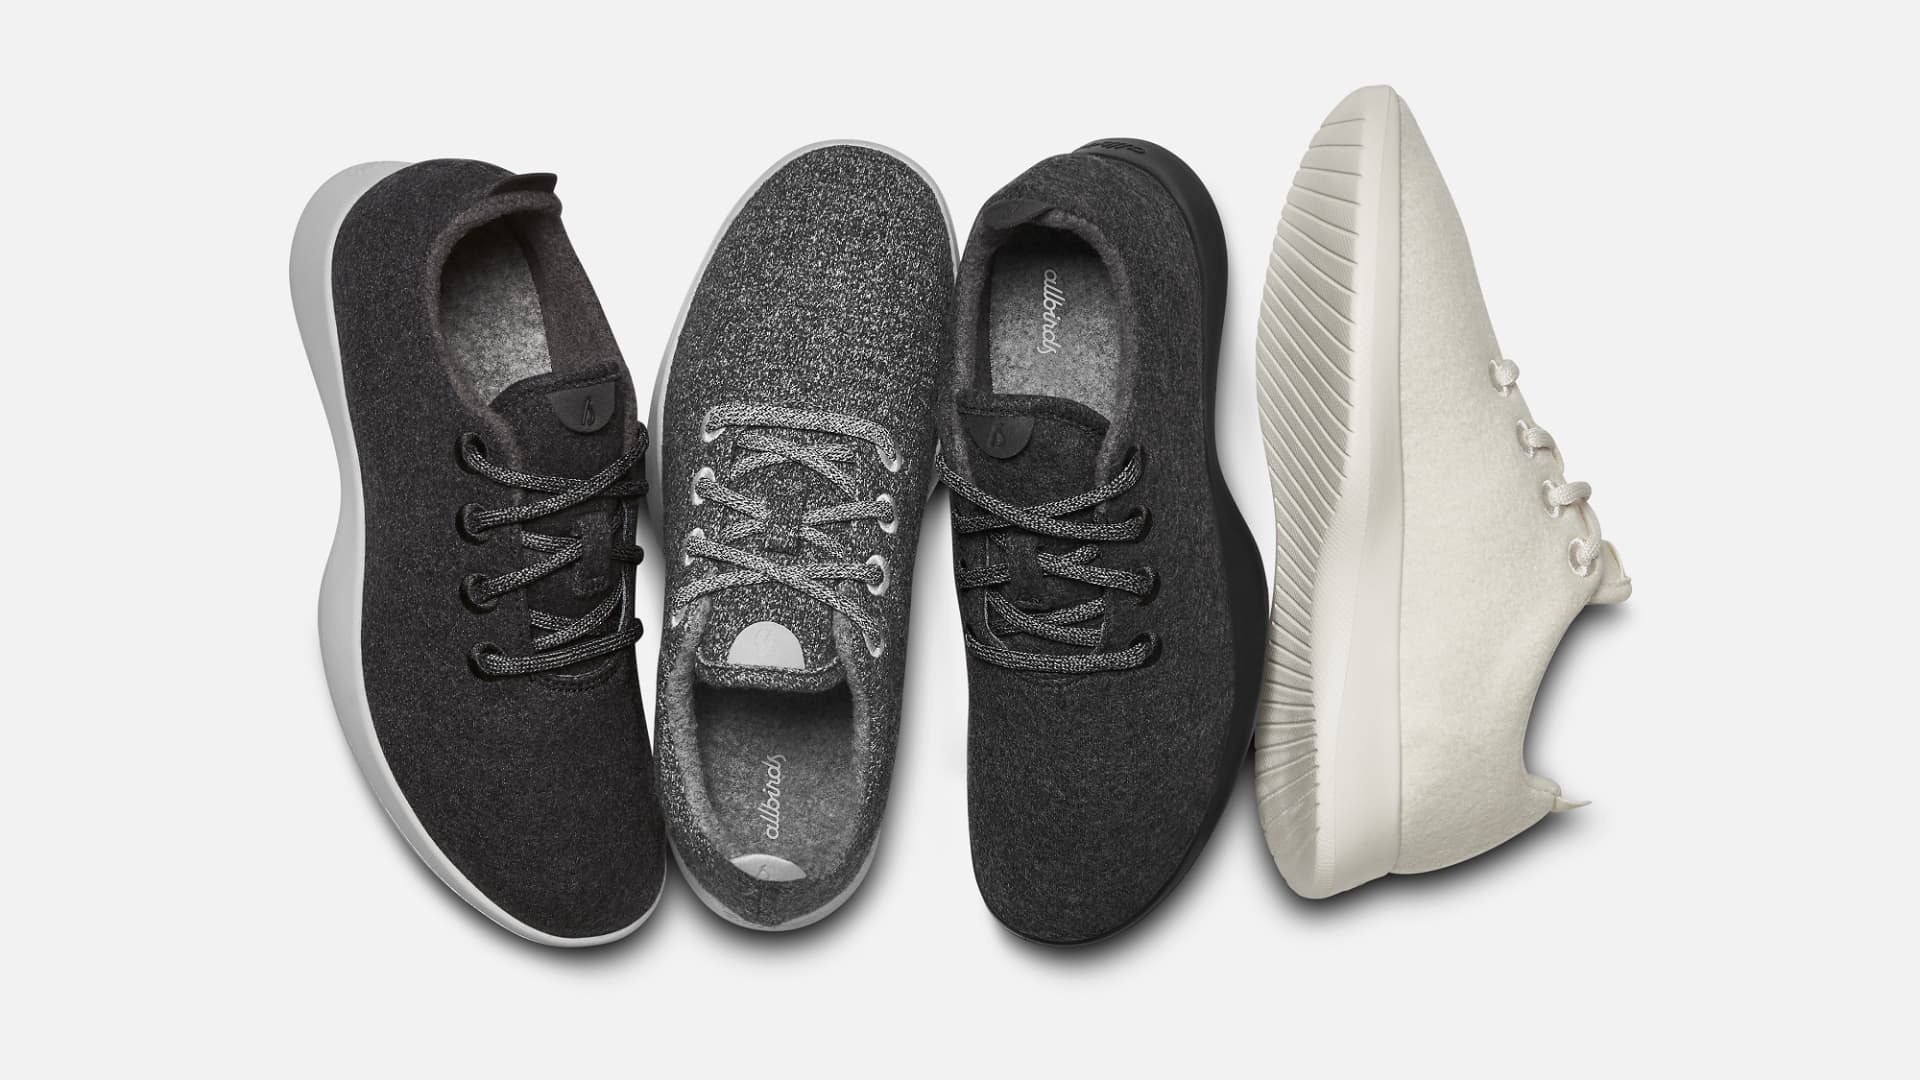 Allbirds Wool Runners come in a variety of minimalist colors.